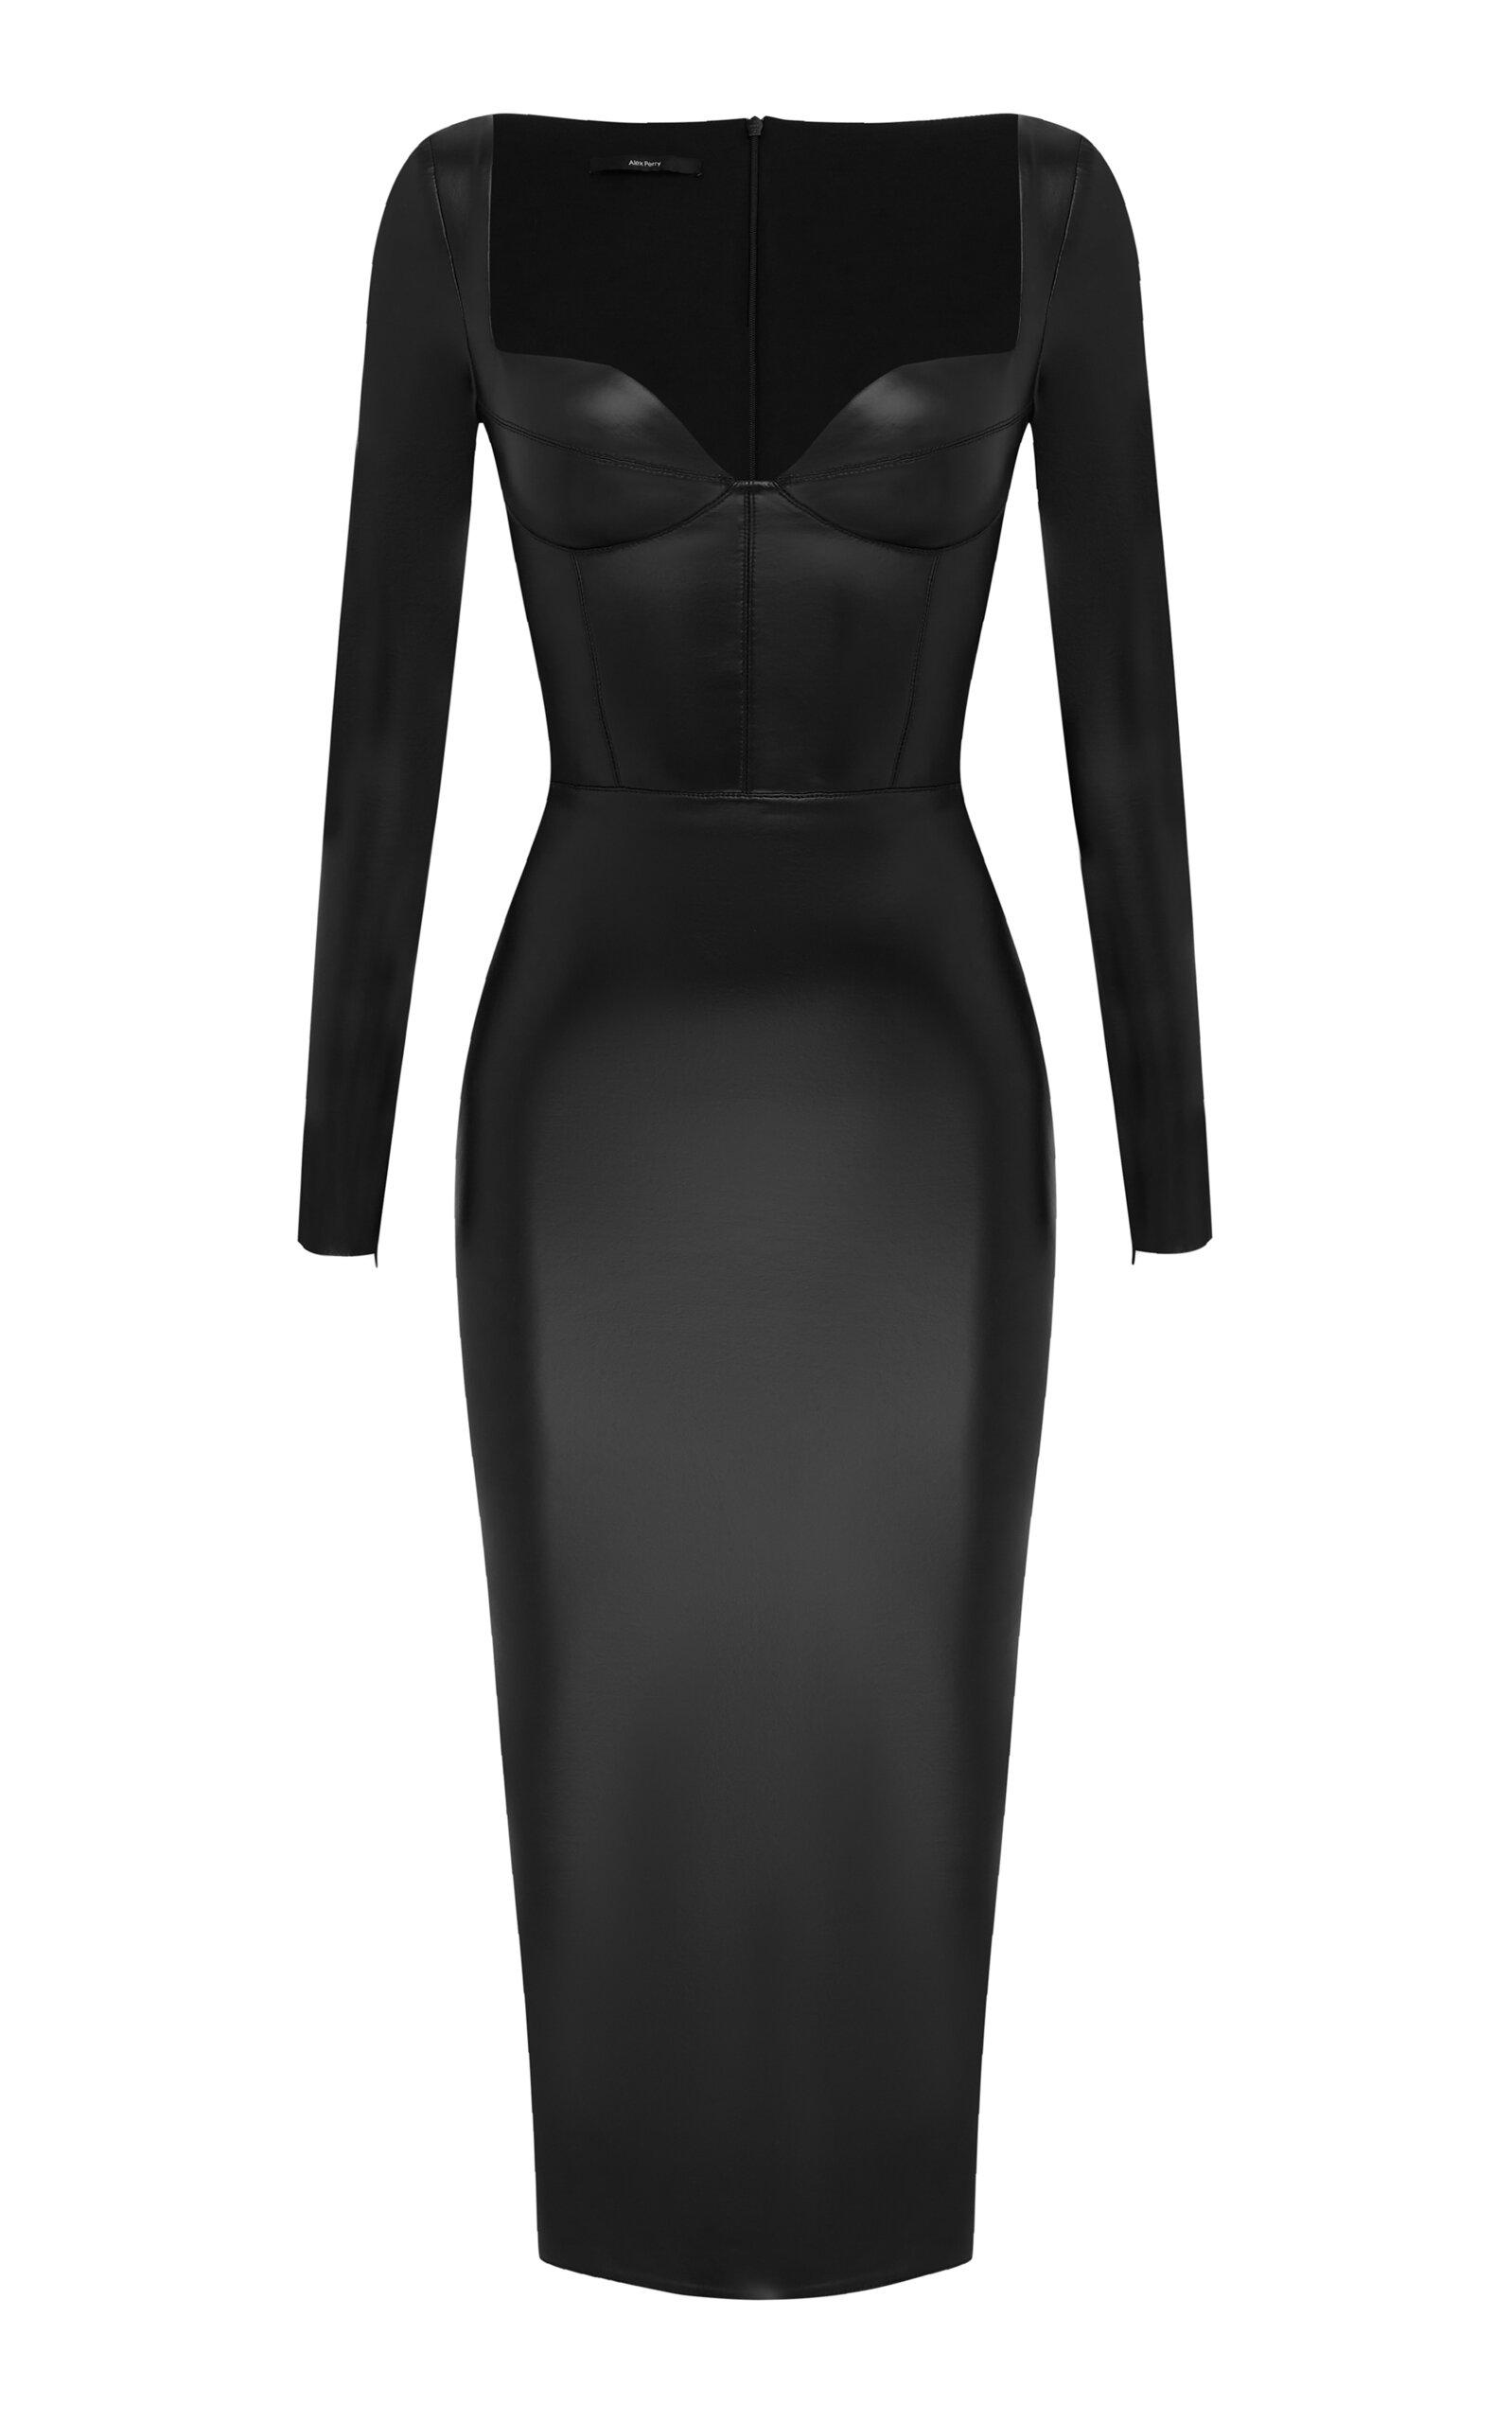 Alex Perry Blade Faux Leather Midi Dress in Black | Lyst